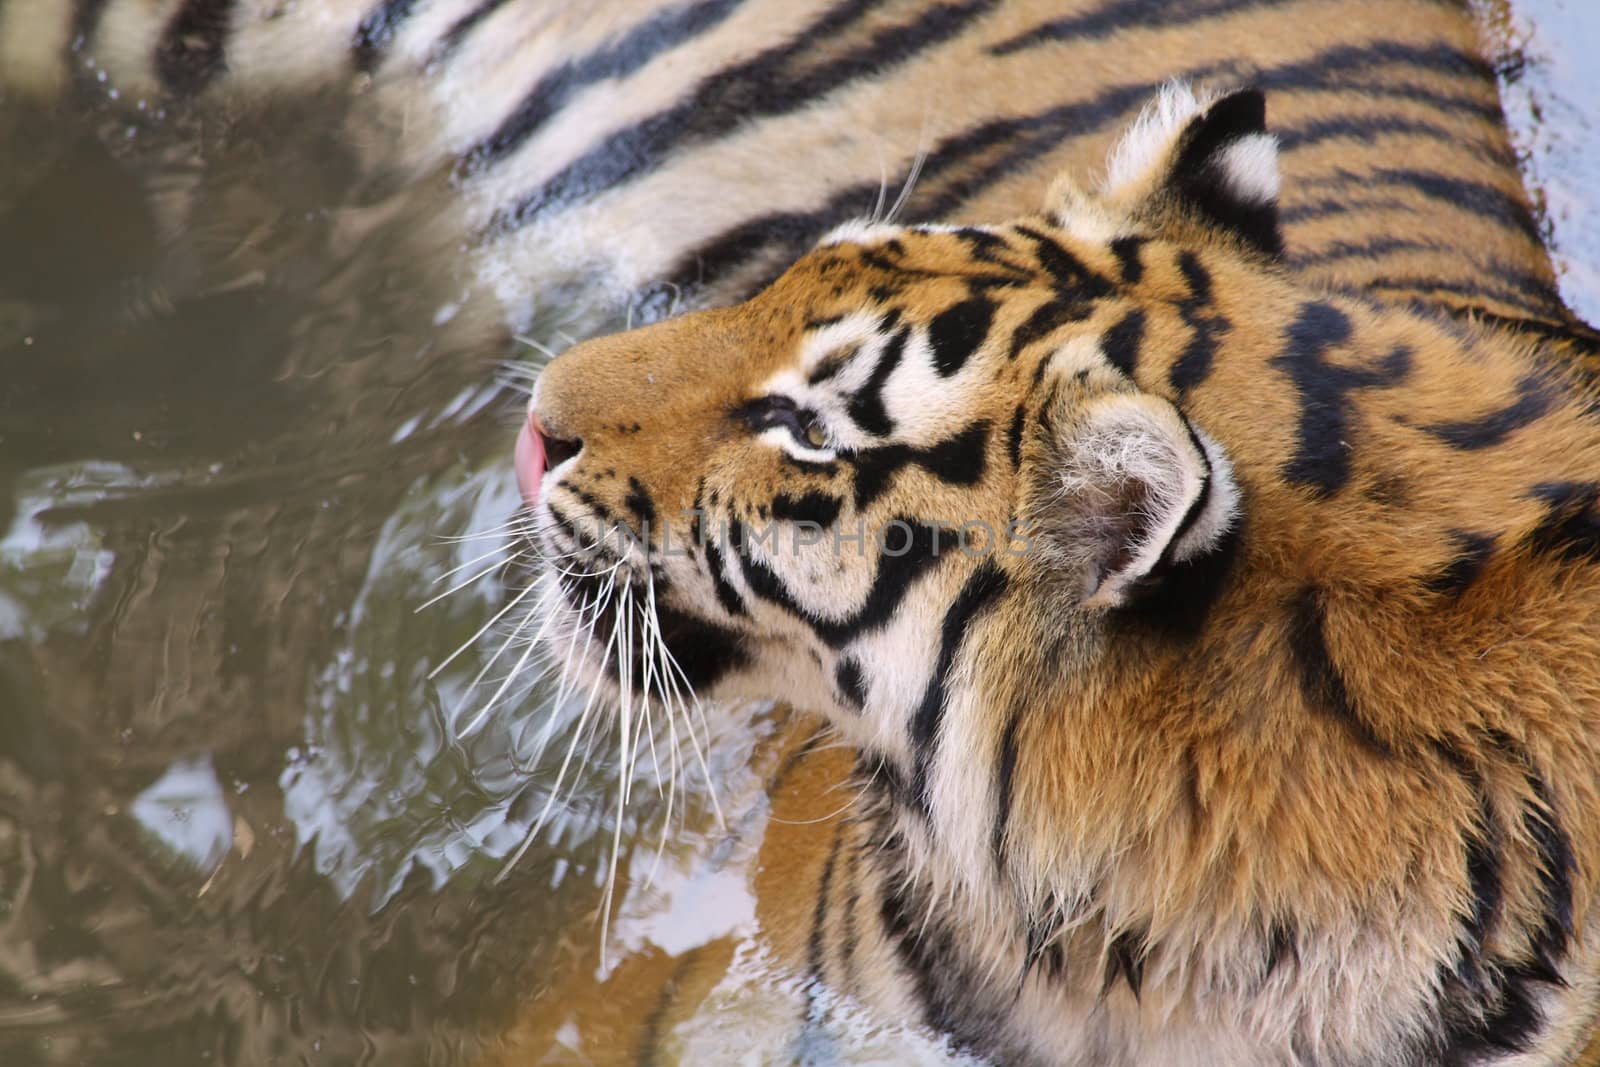 Close up of the tiger lying in the water.